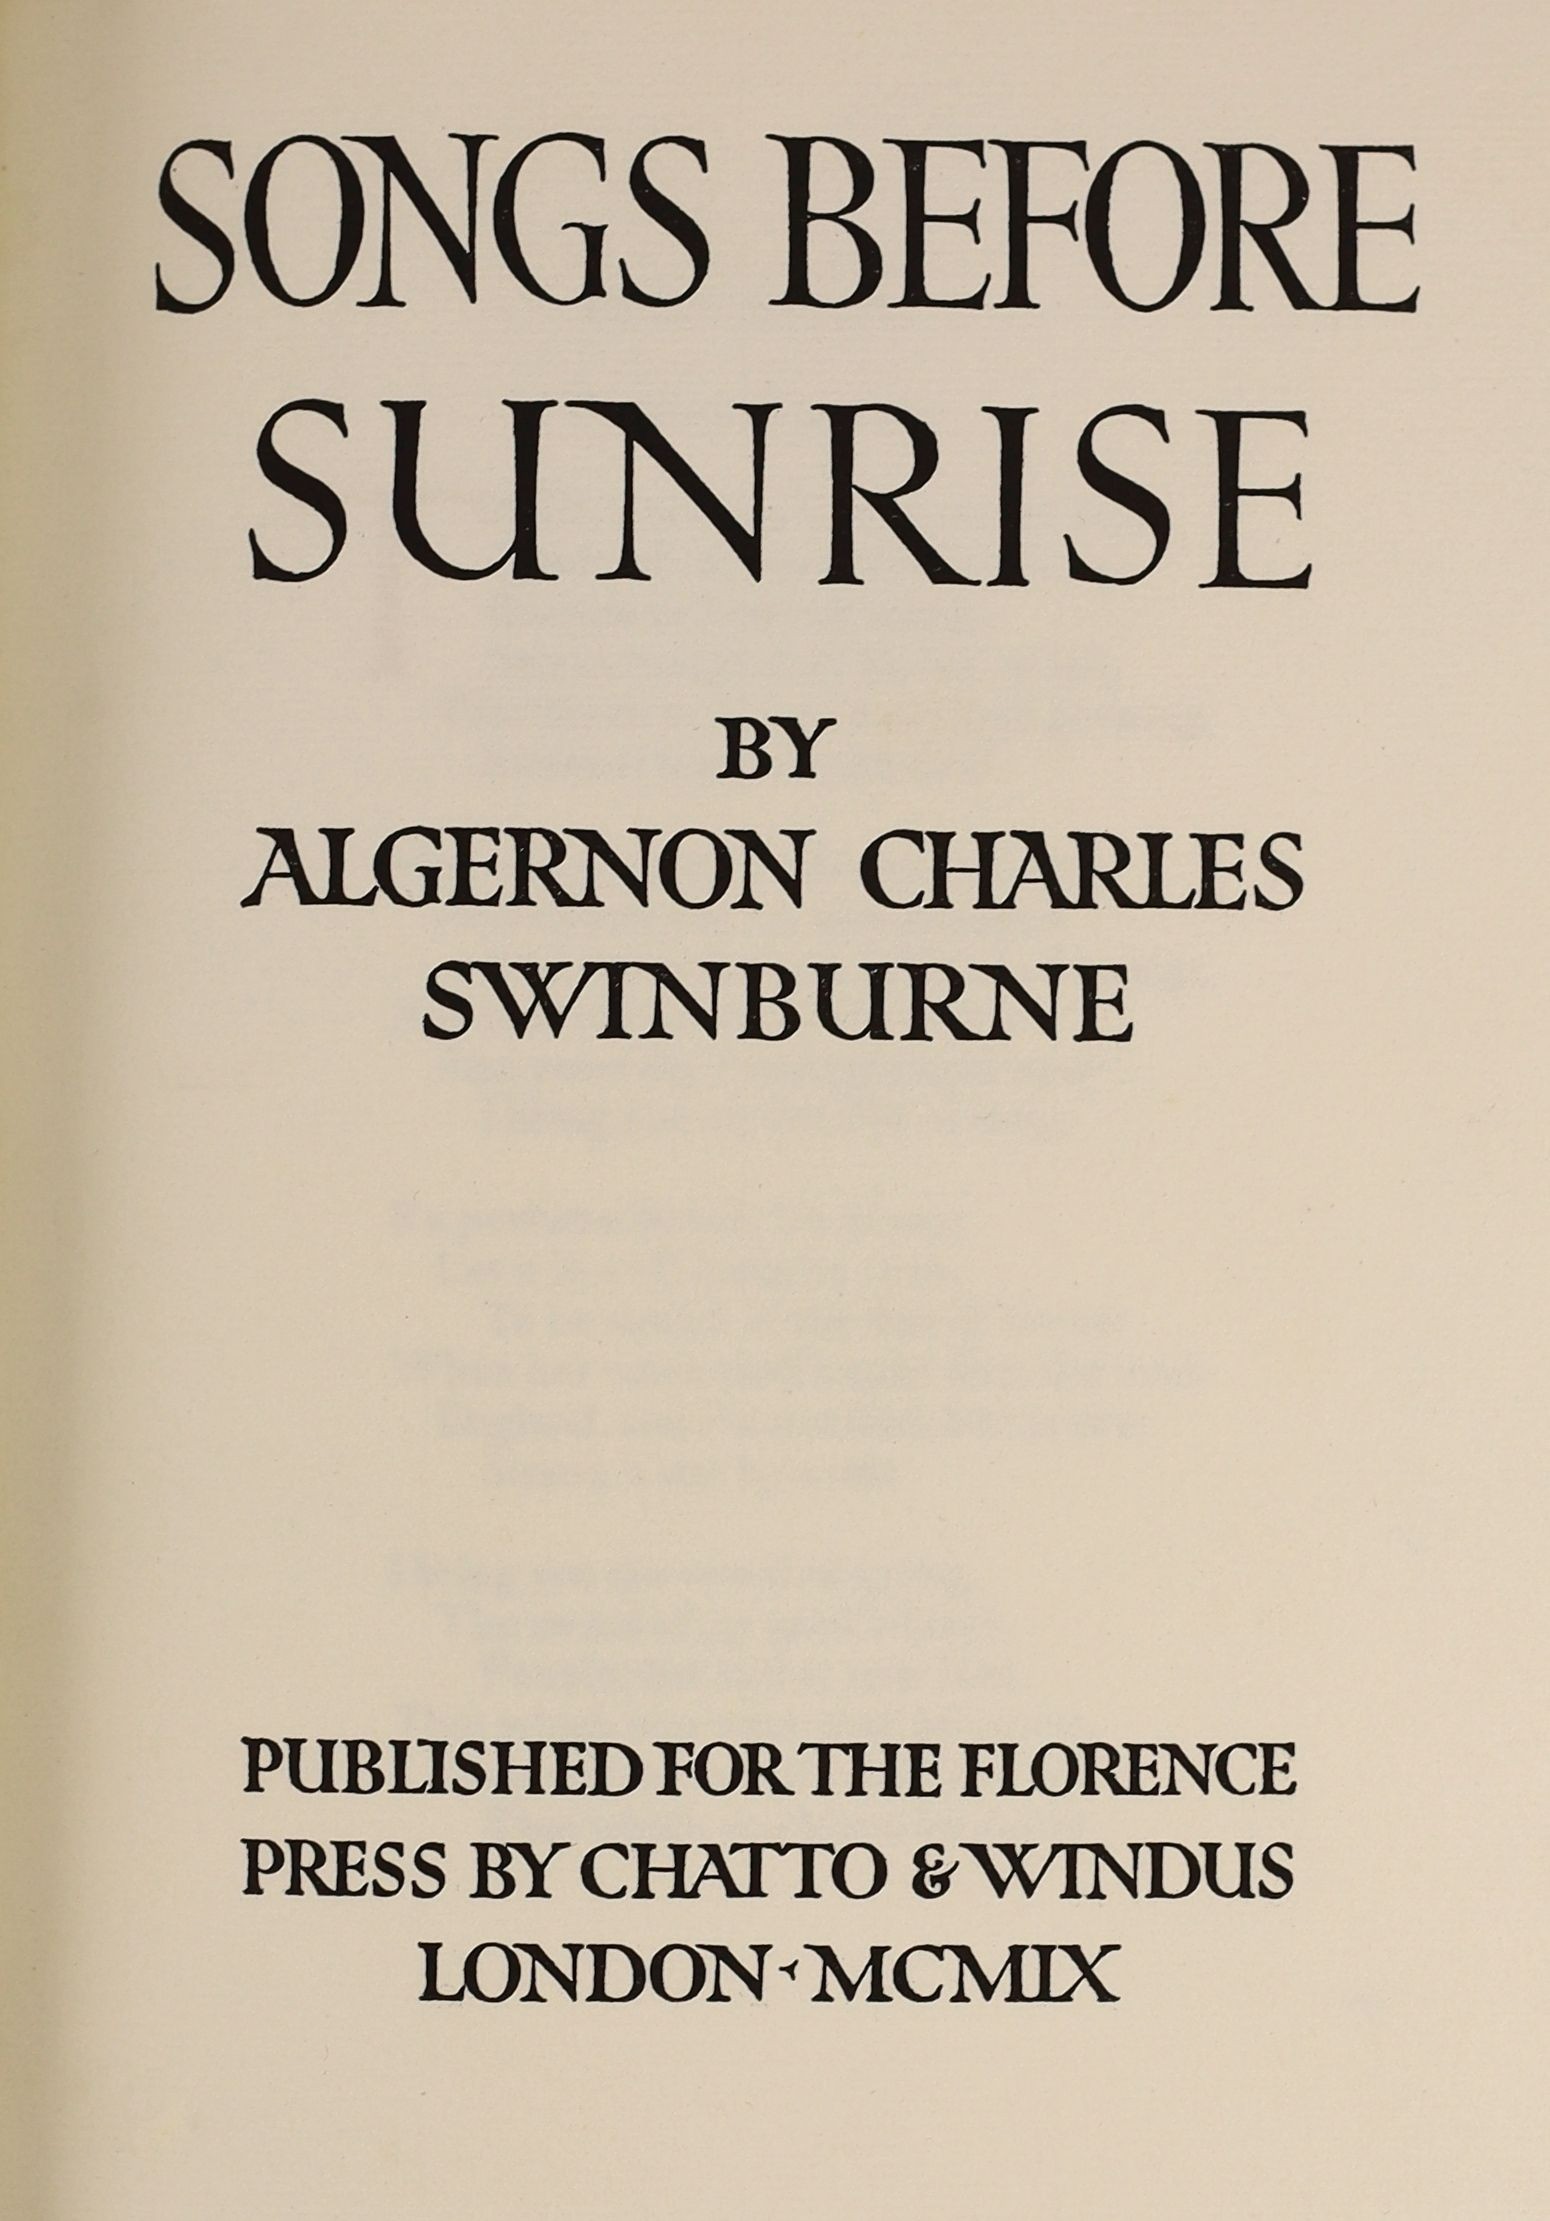 Swinburne, Algernon Charles - Songs Before Sunrise, one of 650, 4to, fine green morocco gilt binding by M. Dunkels, published for the Florence Press by Chatto & Windus, London, 1909